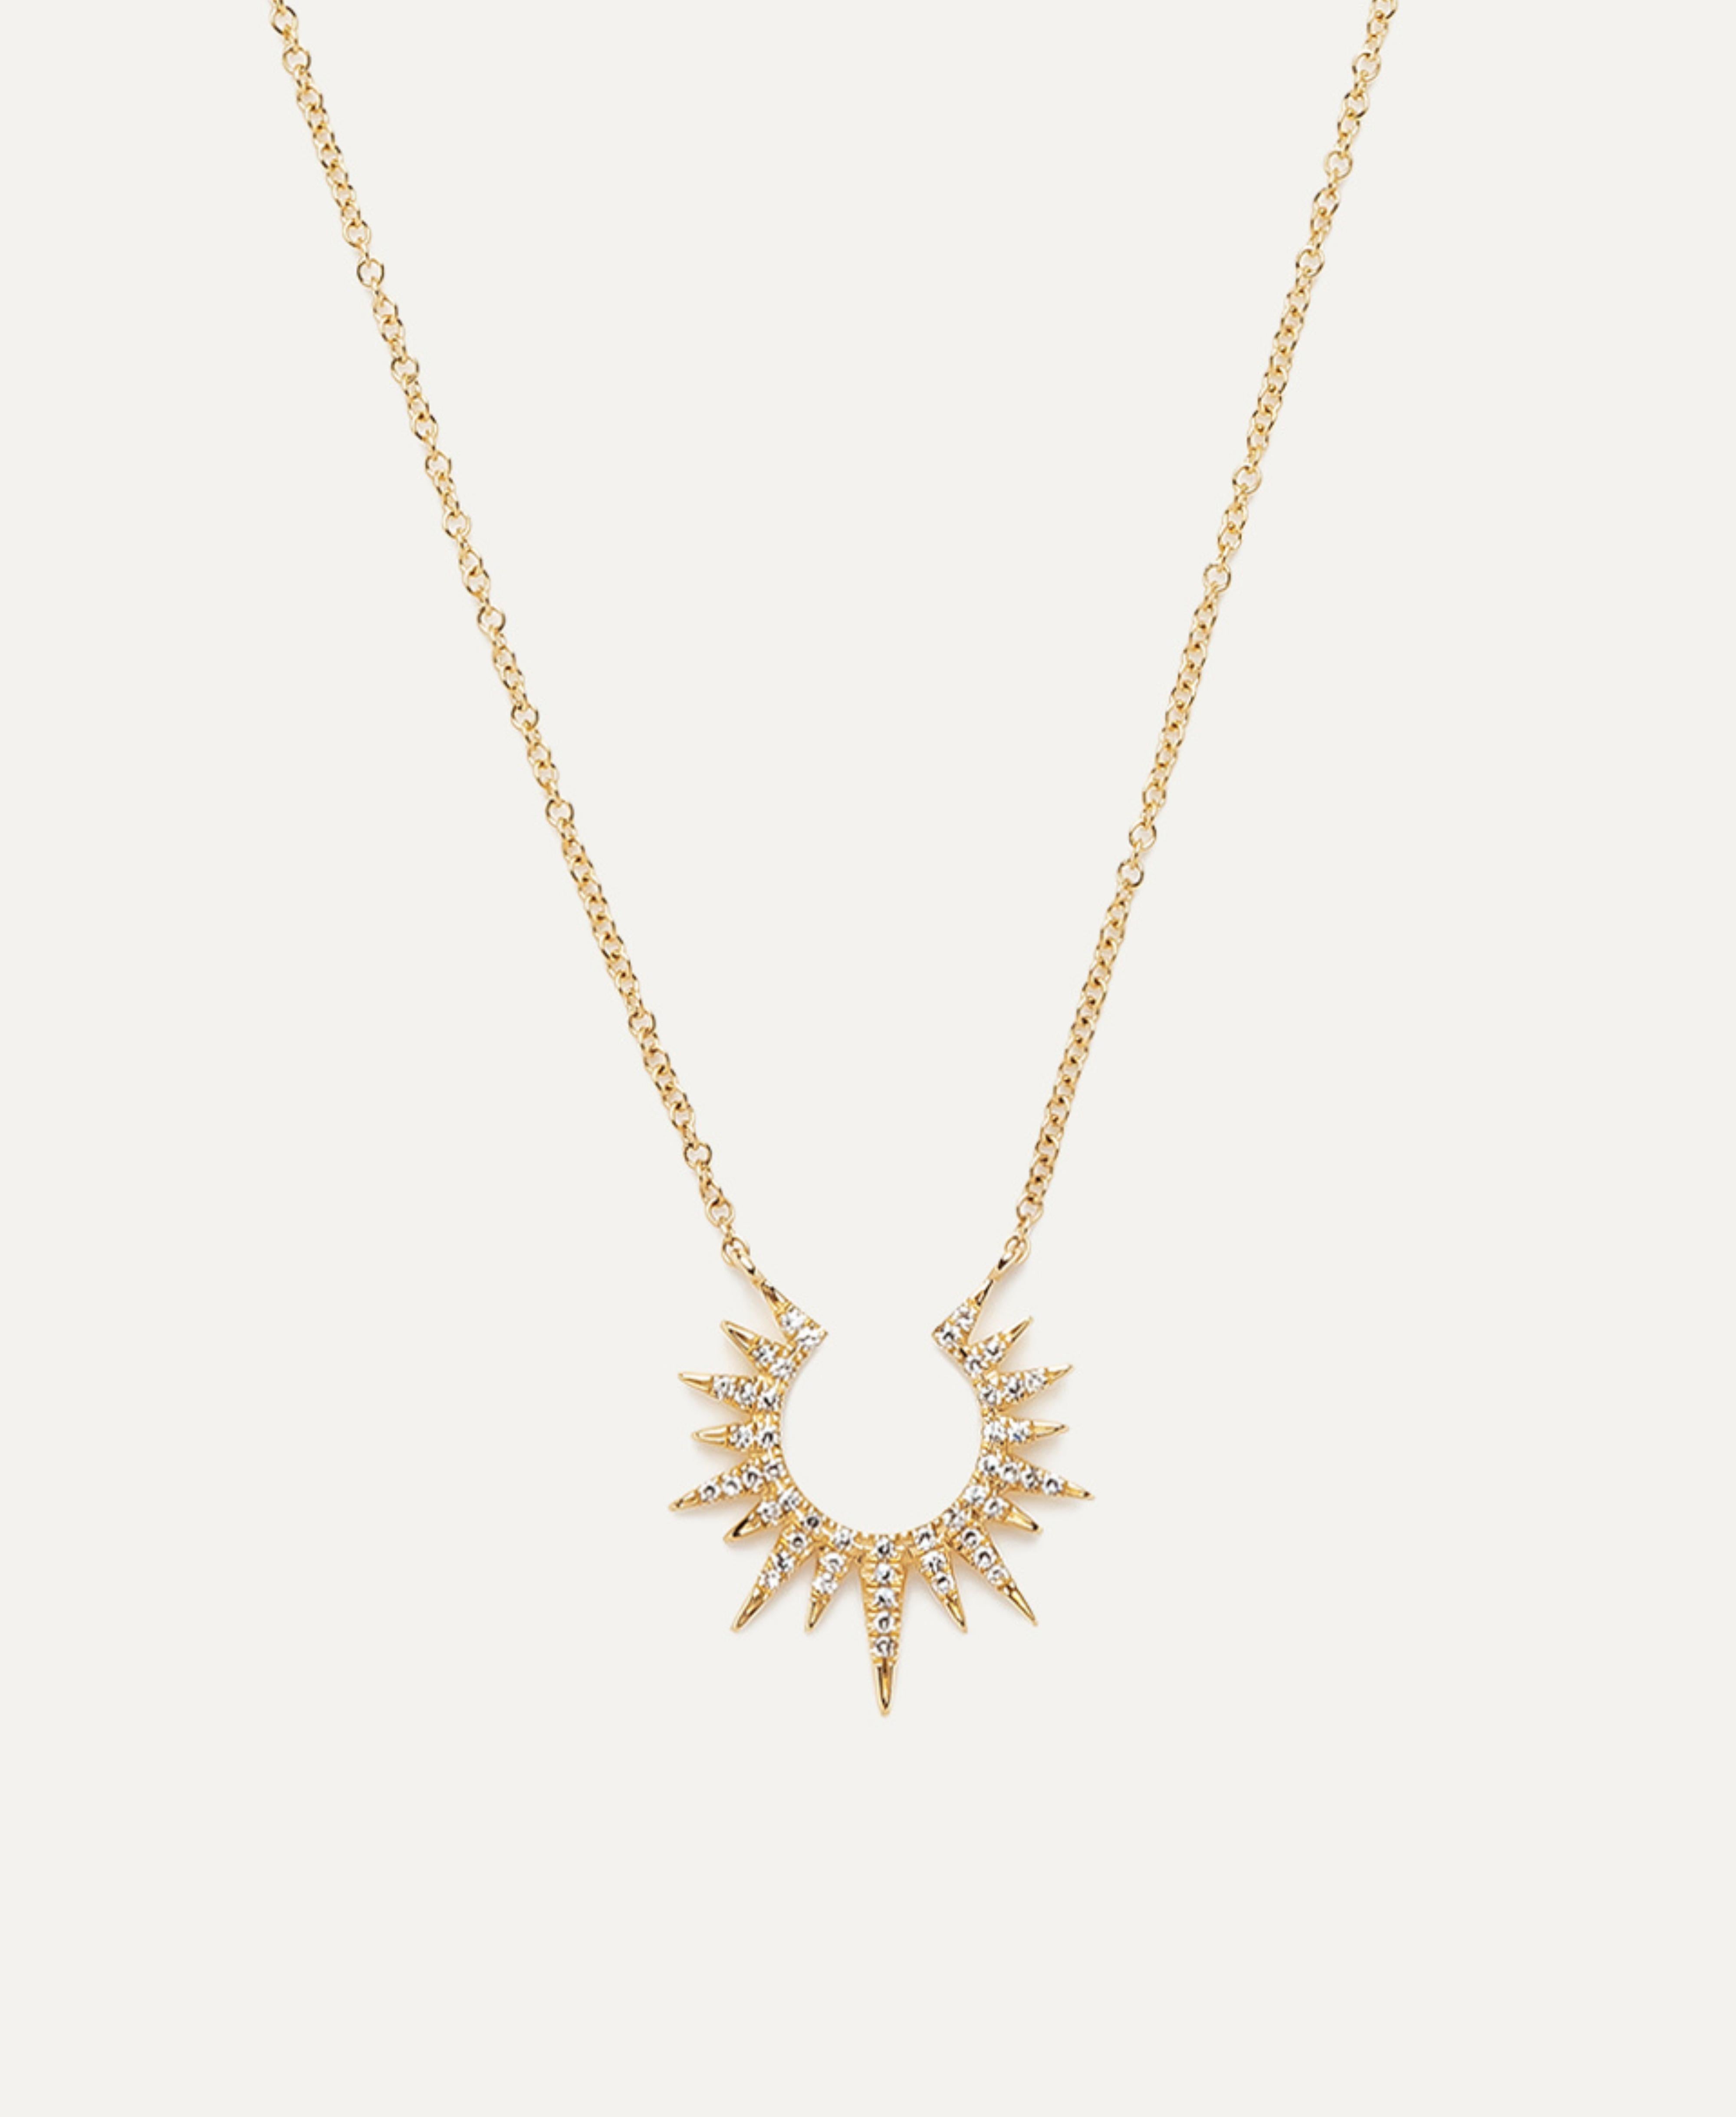 The Diamond Sunburst Necklace is a radiant and captivating jewelry piece inspired by the brilliance of the sun. Crafted from luminous 14k yellow gold, this pendant necklace features a sunburst design, where a dazzling array of white diamonds is